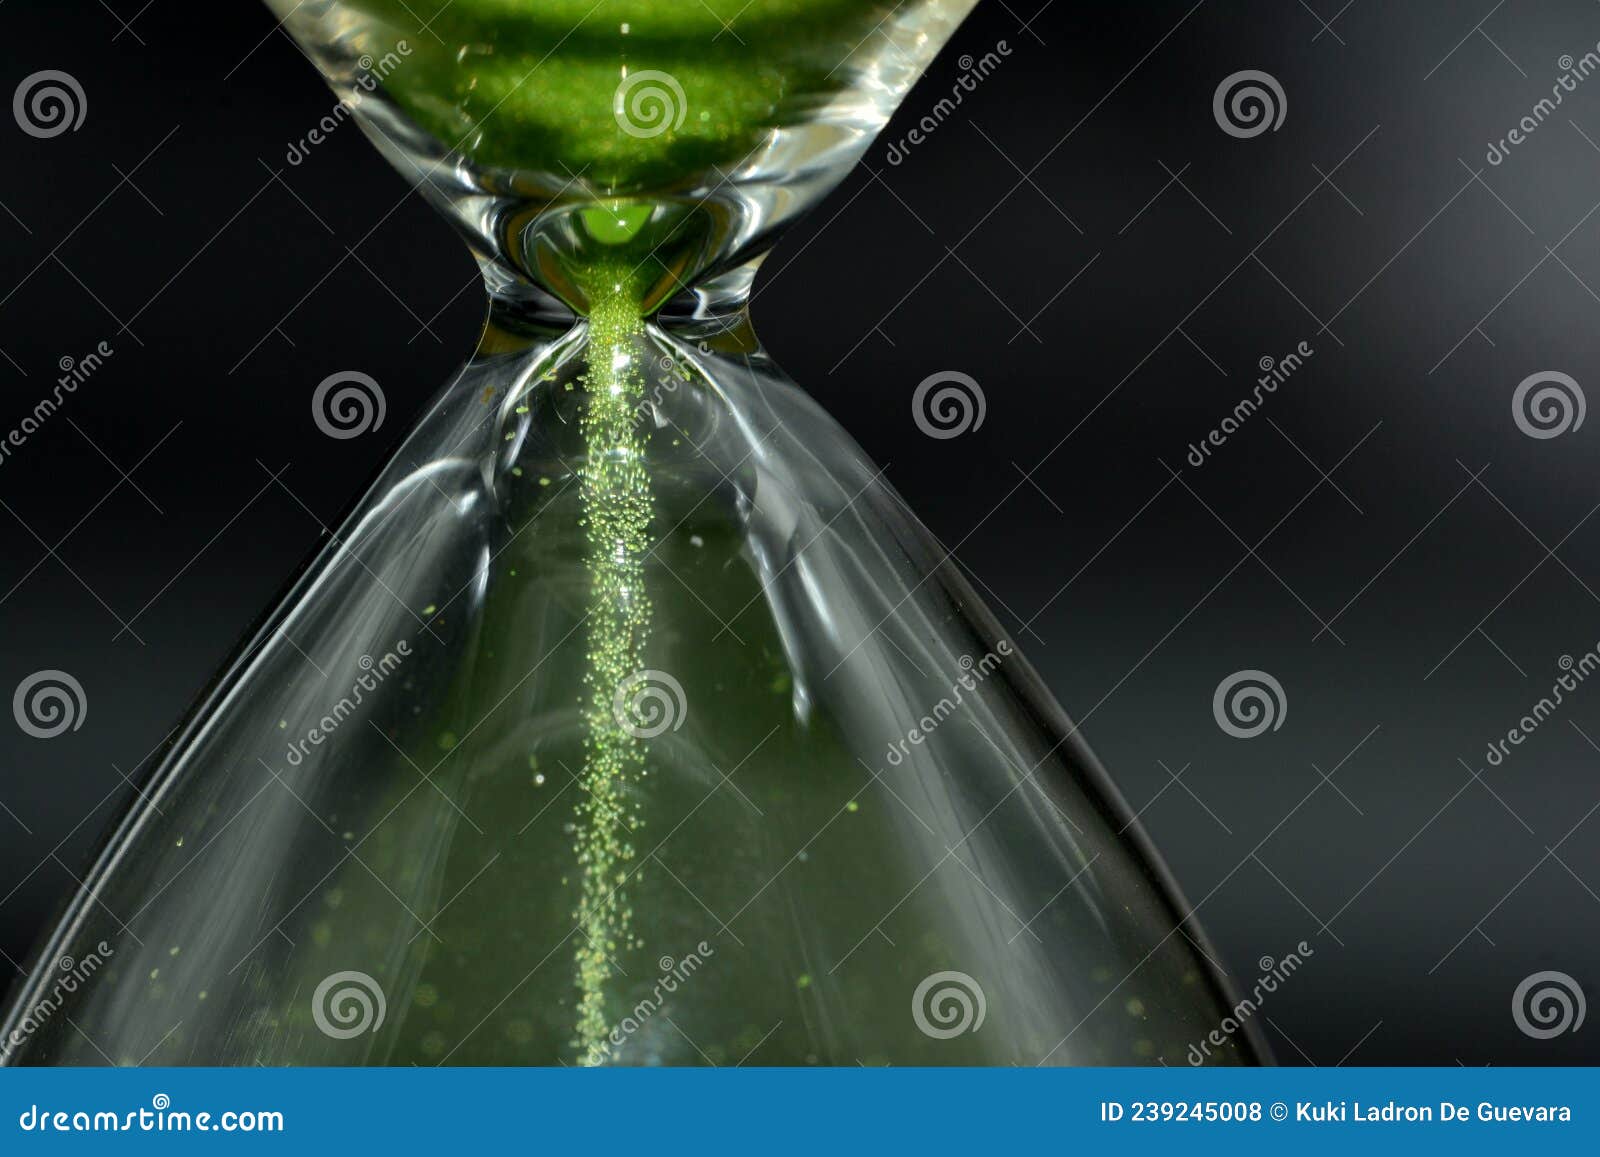 detail of a green hourglass